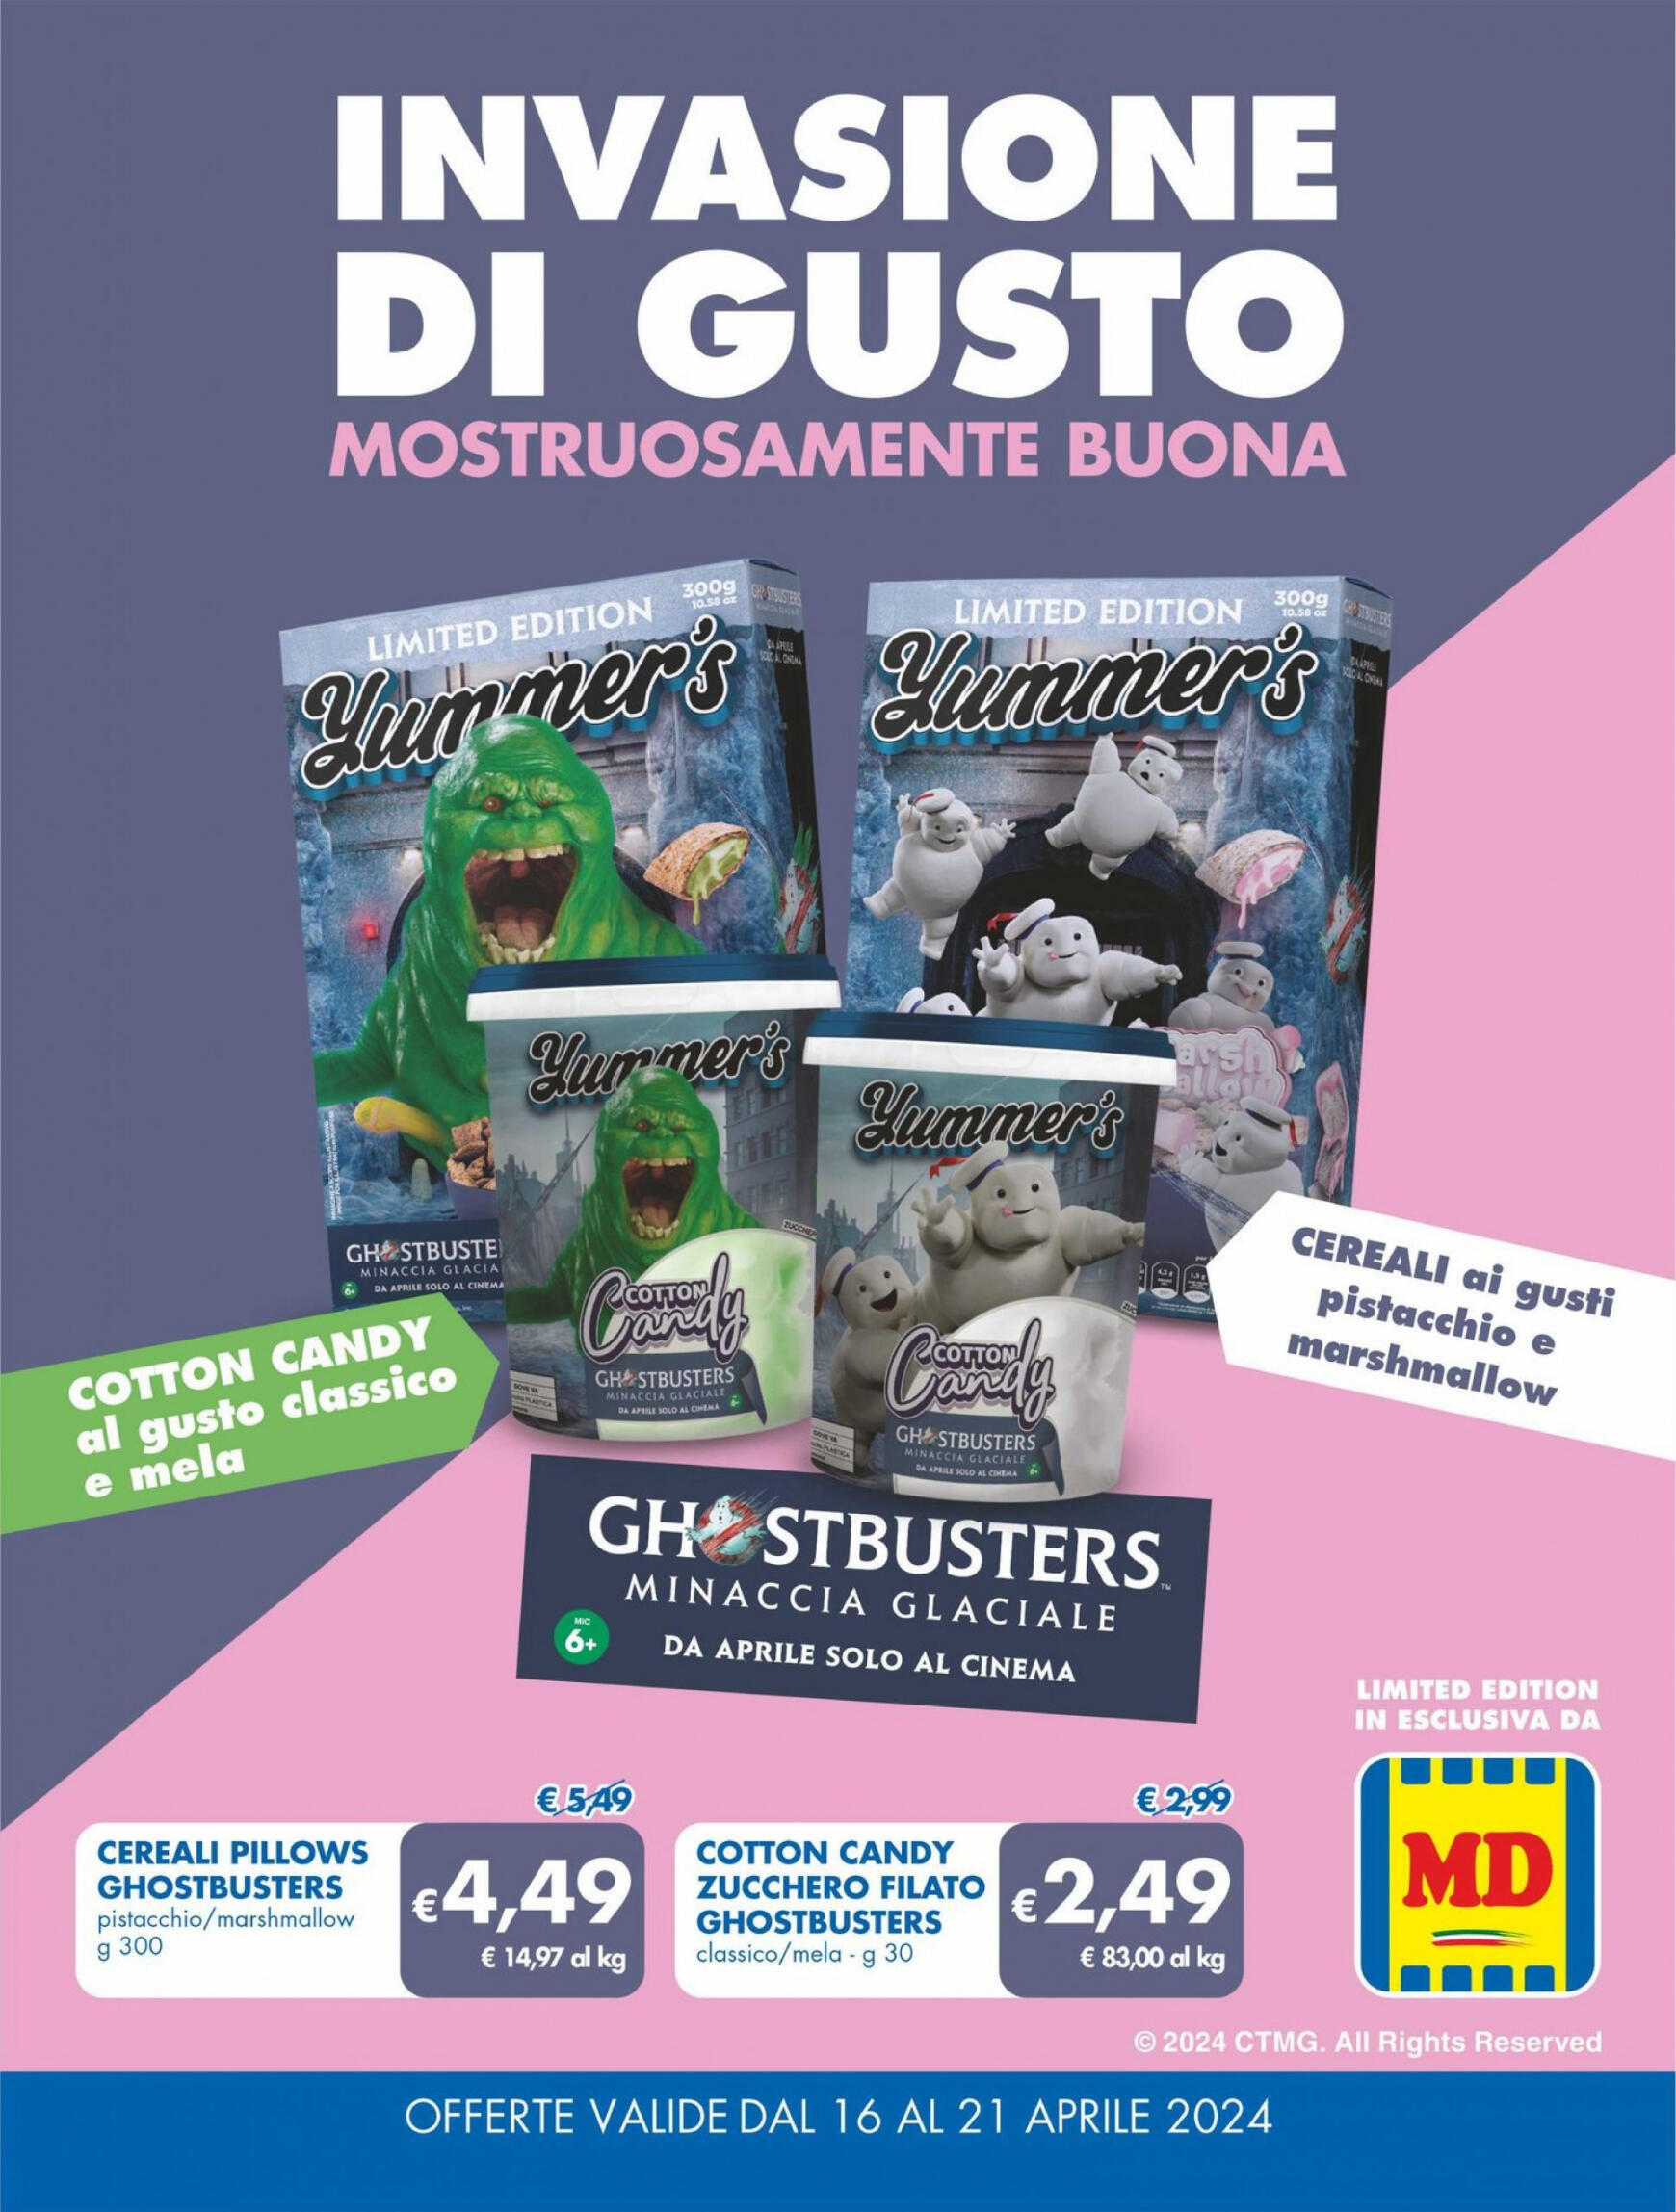 md-discount - Nuovo volantino MD 16.04. - 21.04. - page: 15